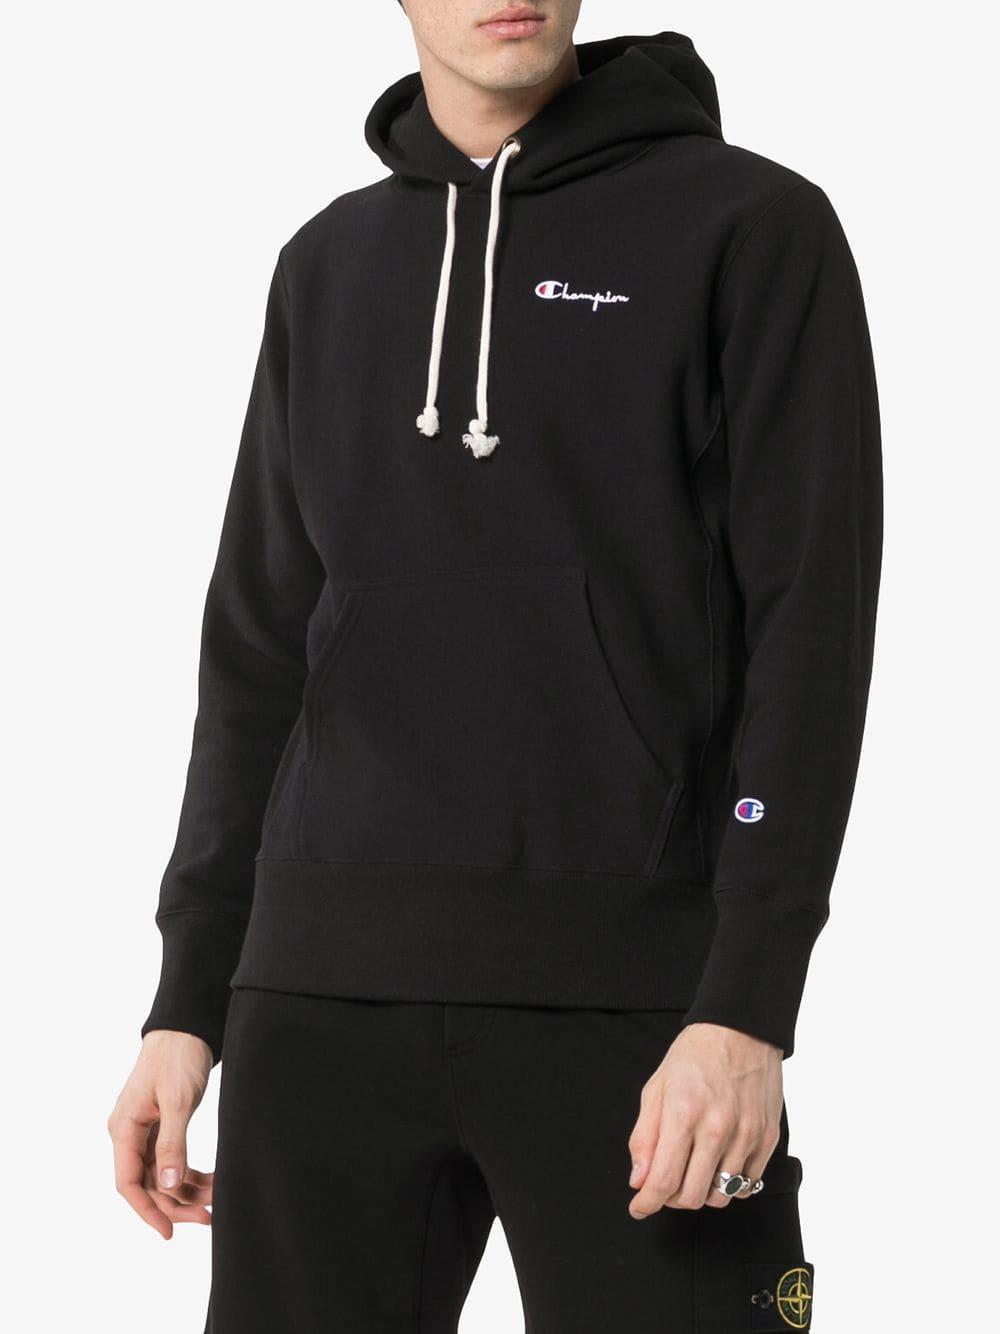 Lyst - Champion Logo Hoodie in Black for Men - Save 9%